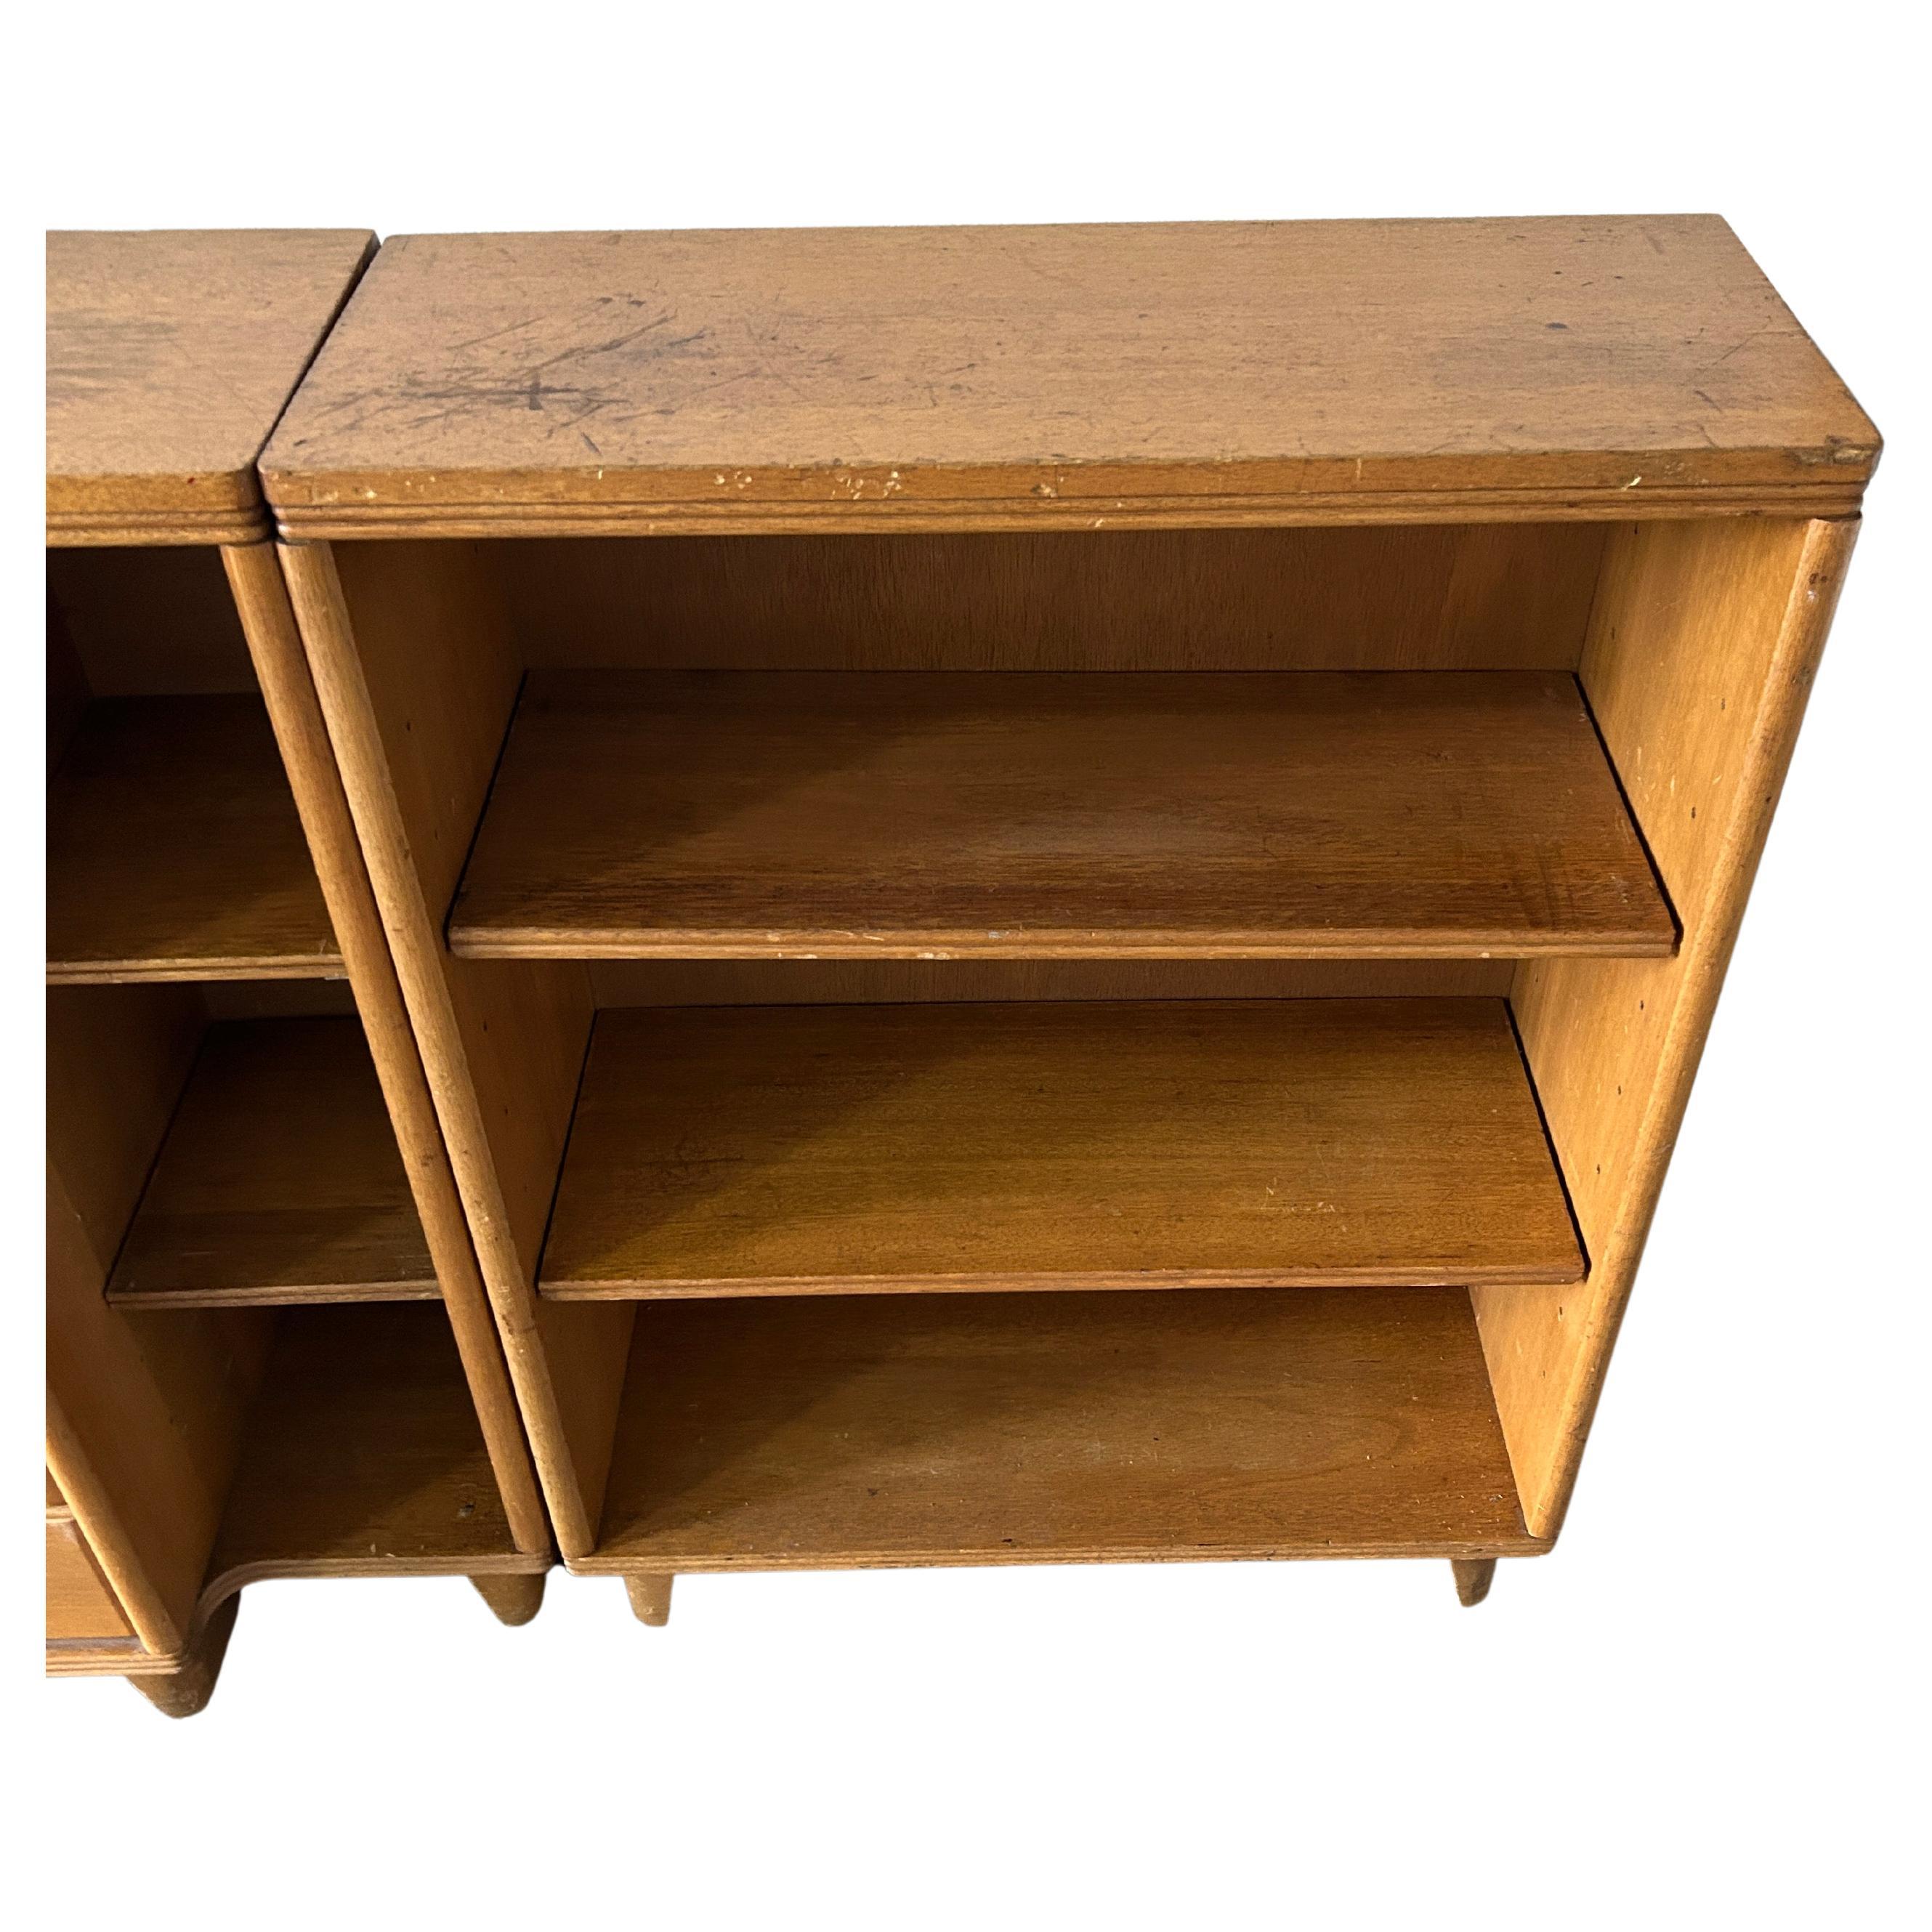 American Mid-Century Modern Deco Drop Down Desk with 2 Bookcases